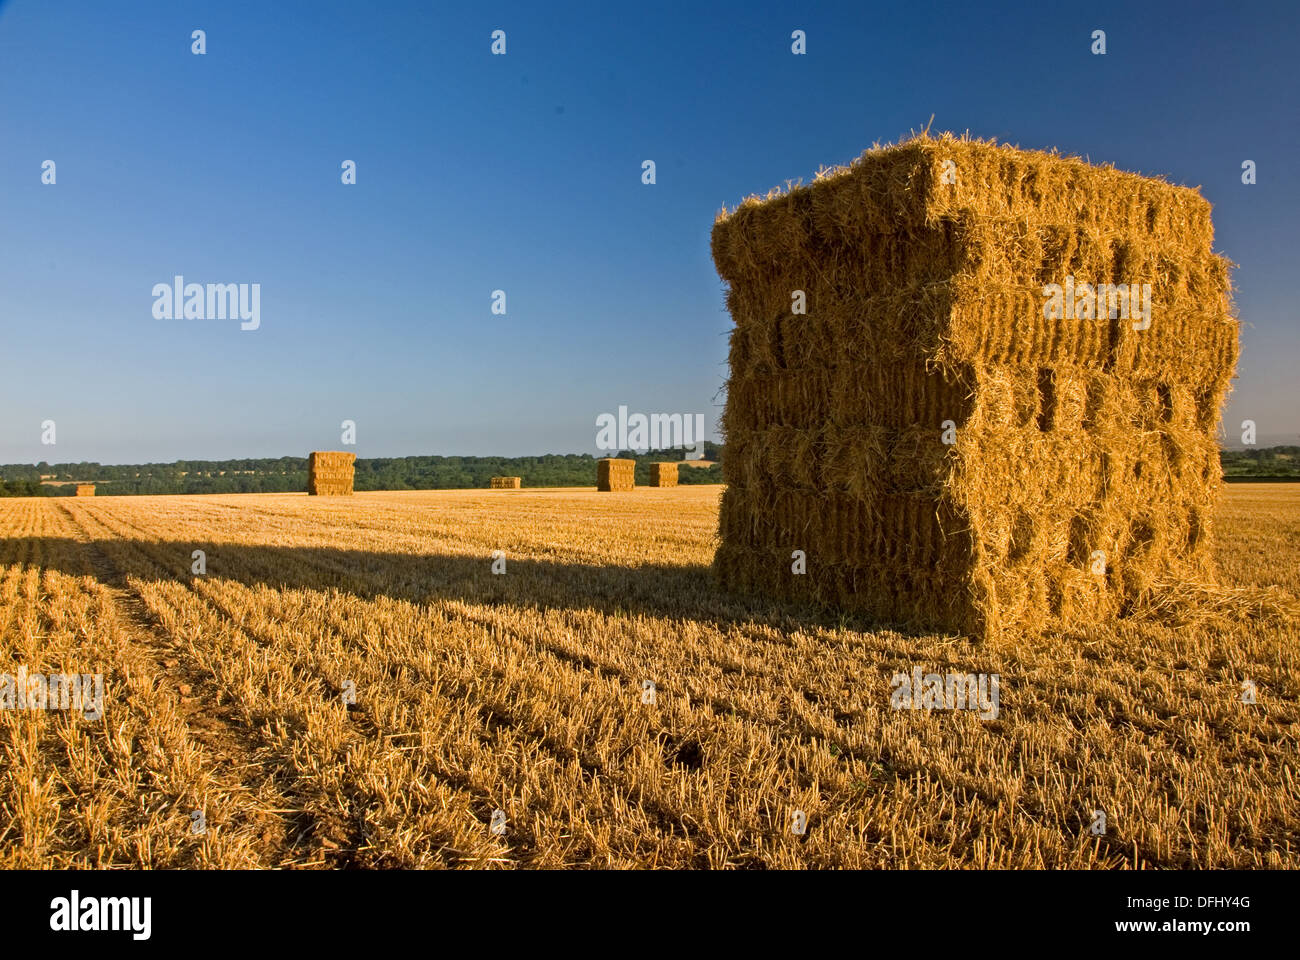 Cotswold landscape scene and a square haystack cast a long shadow across a field of stubble. Stock Photo